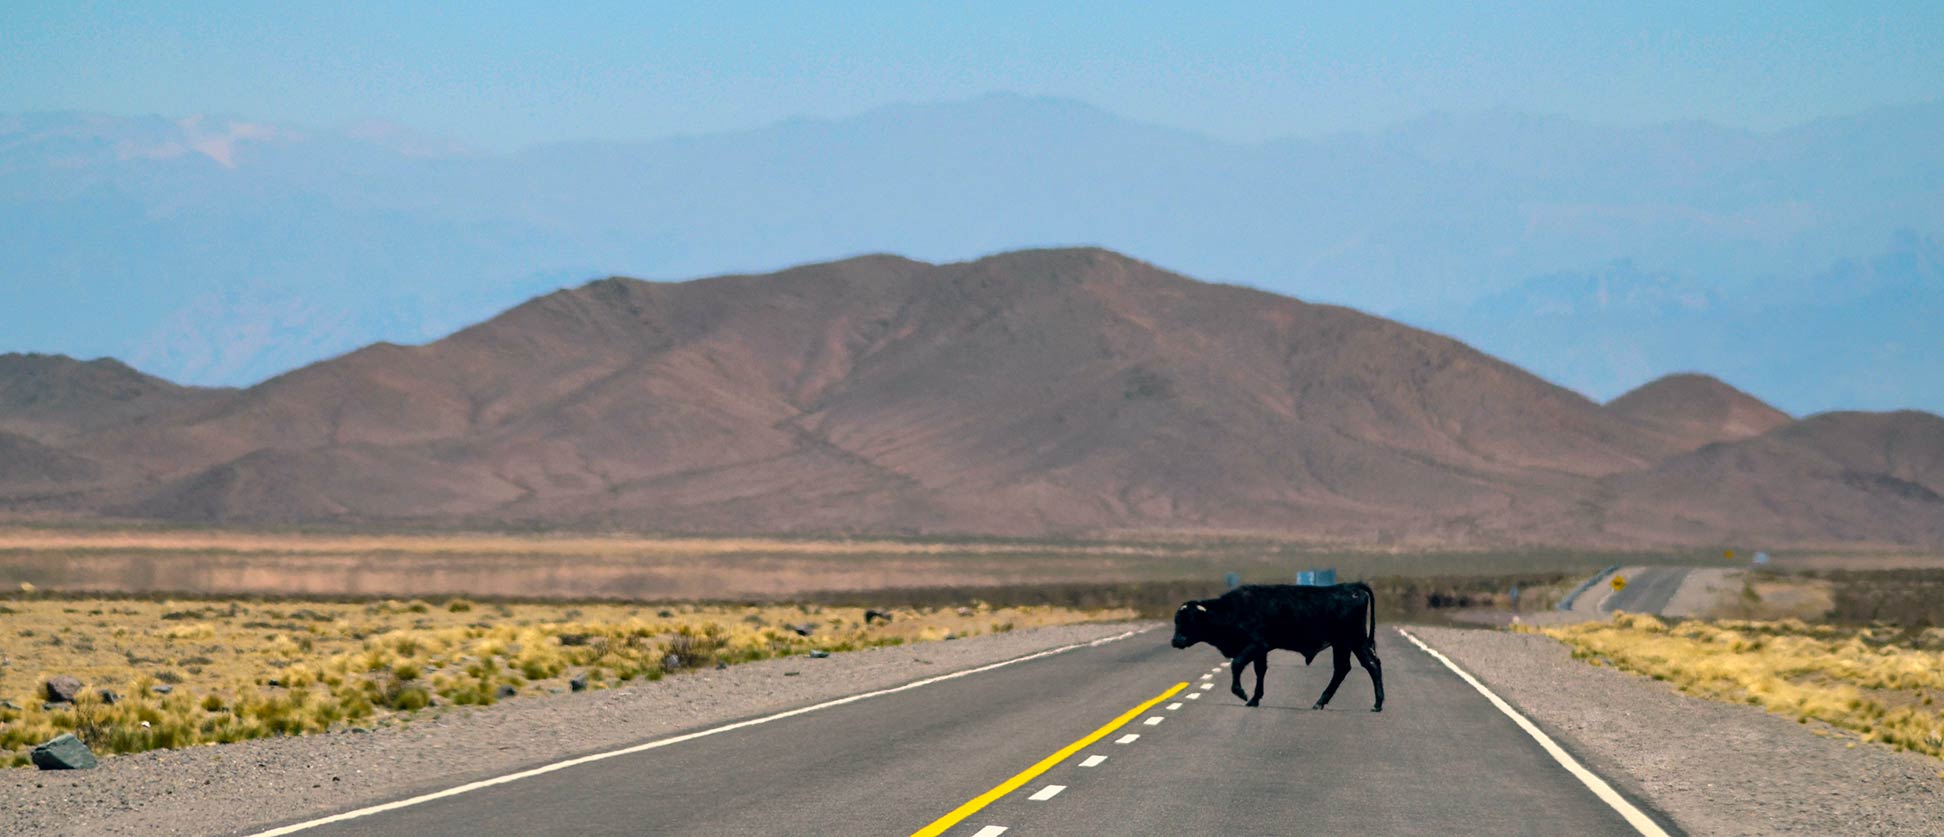 A Black Angus bull crosses the road in the Argentinean province of Salta.